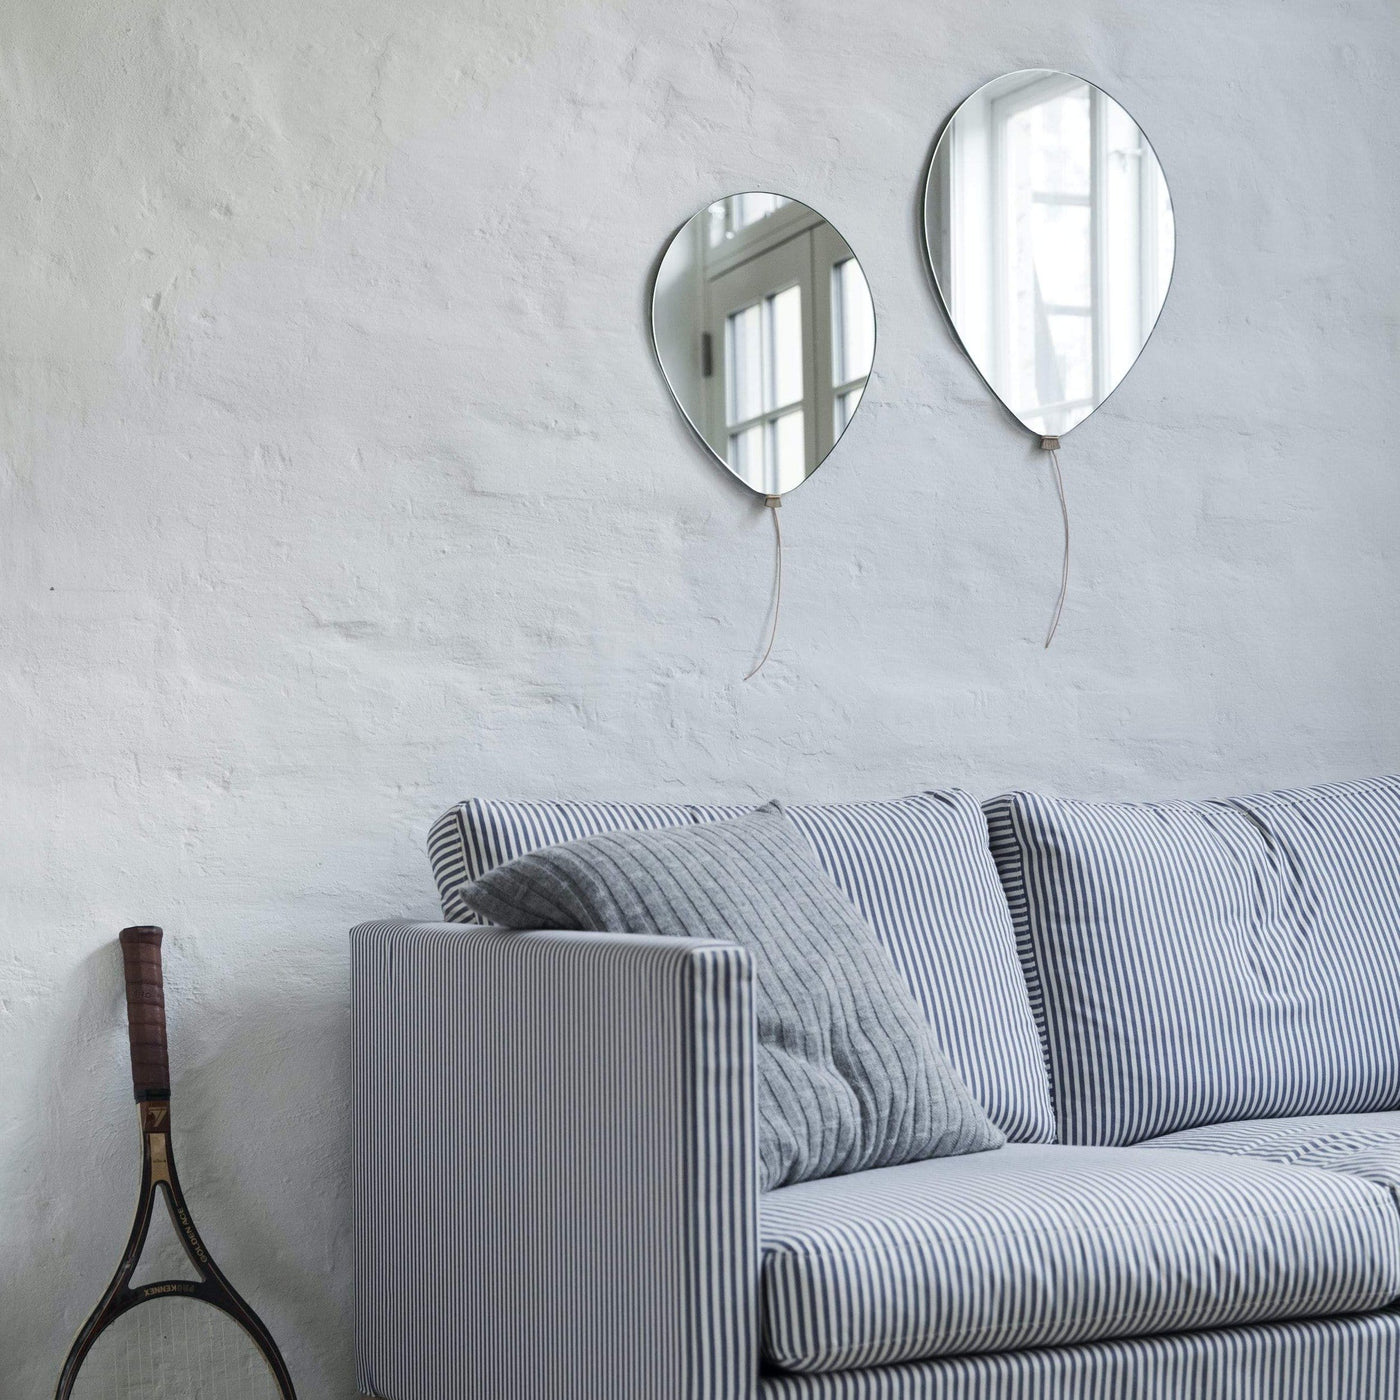 EO Balloon mirrors available in two sizes shop online at someday designs.